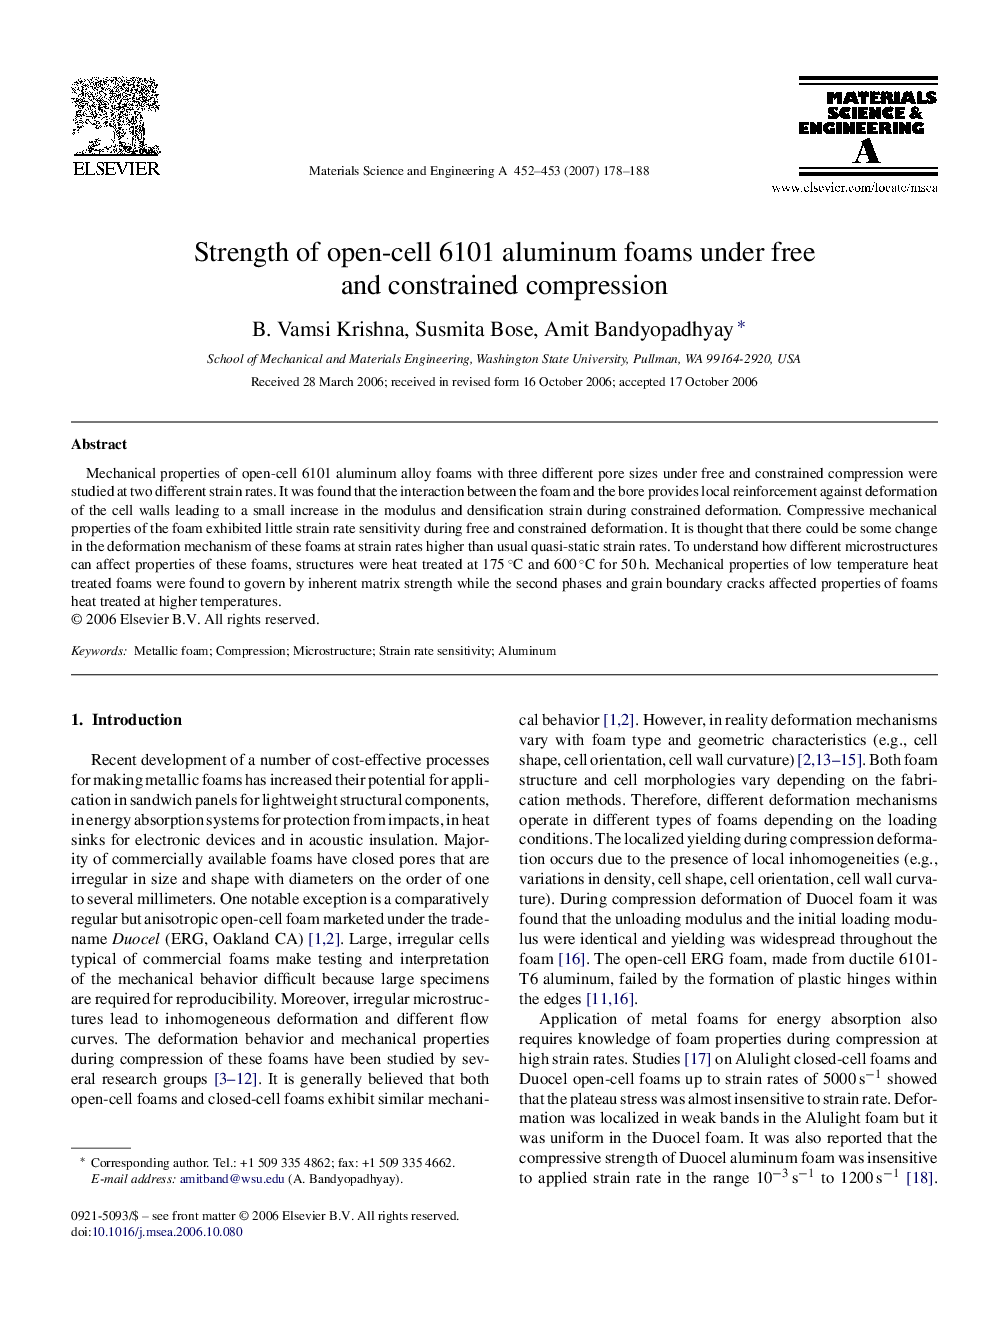 Strength of open-cell 6101 aluminum foams under free and constrained compression